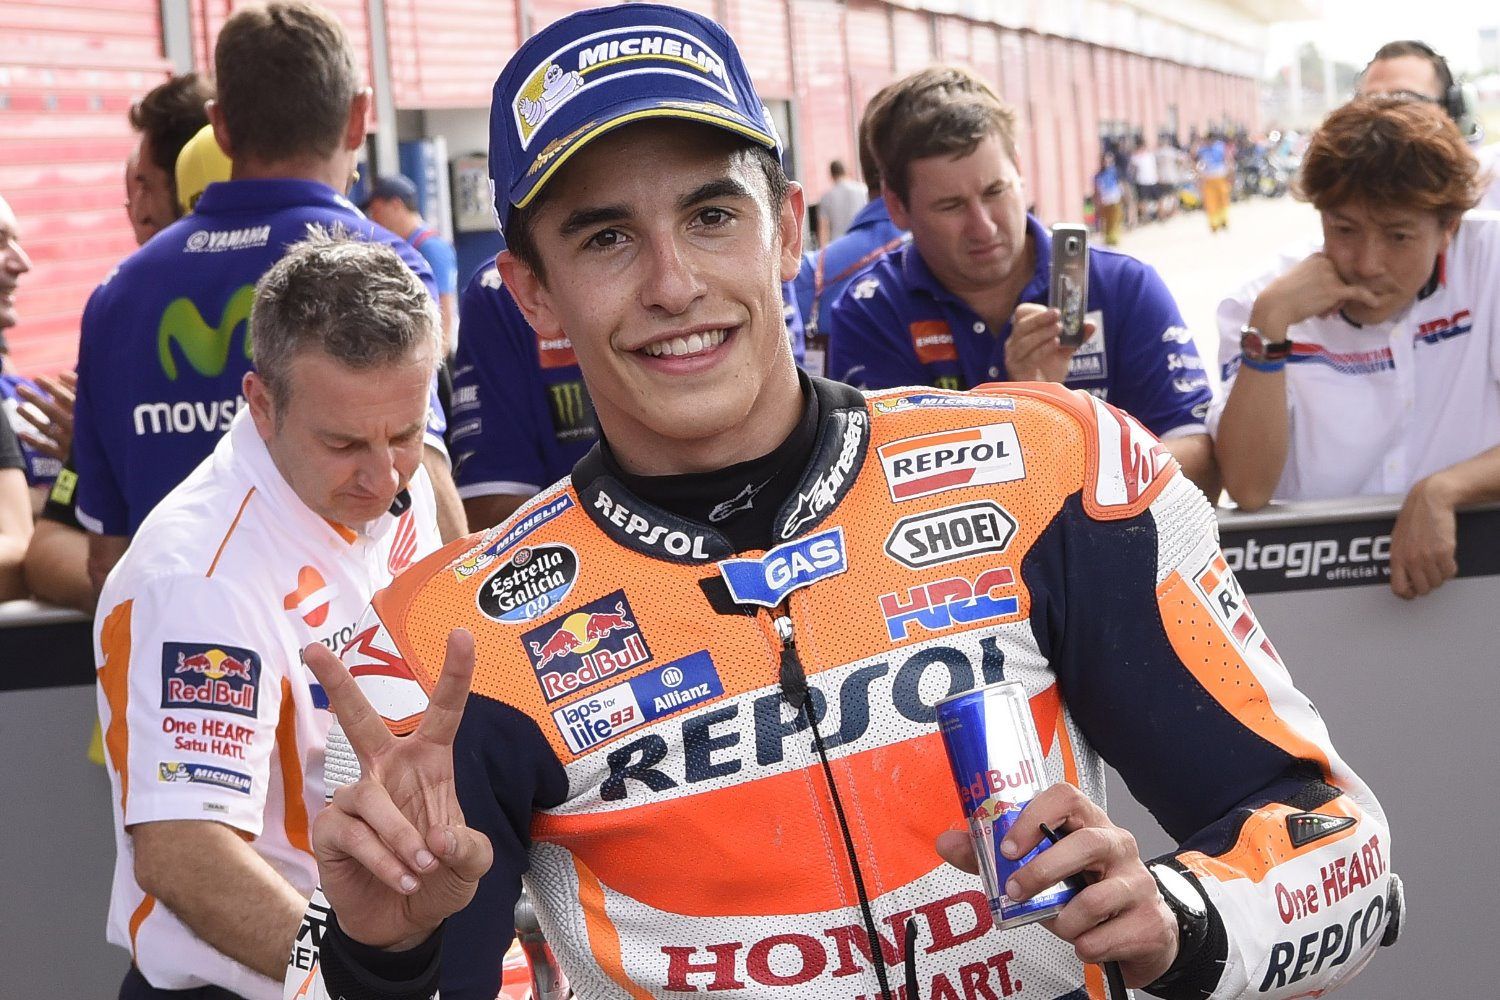 Marc Marquez after winning pole on different tire than he will race